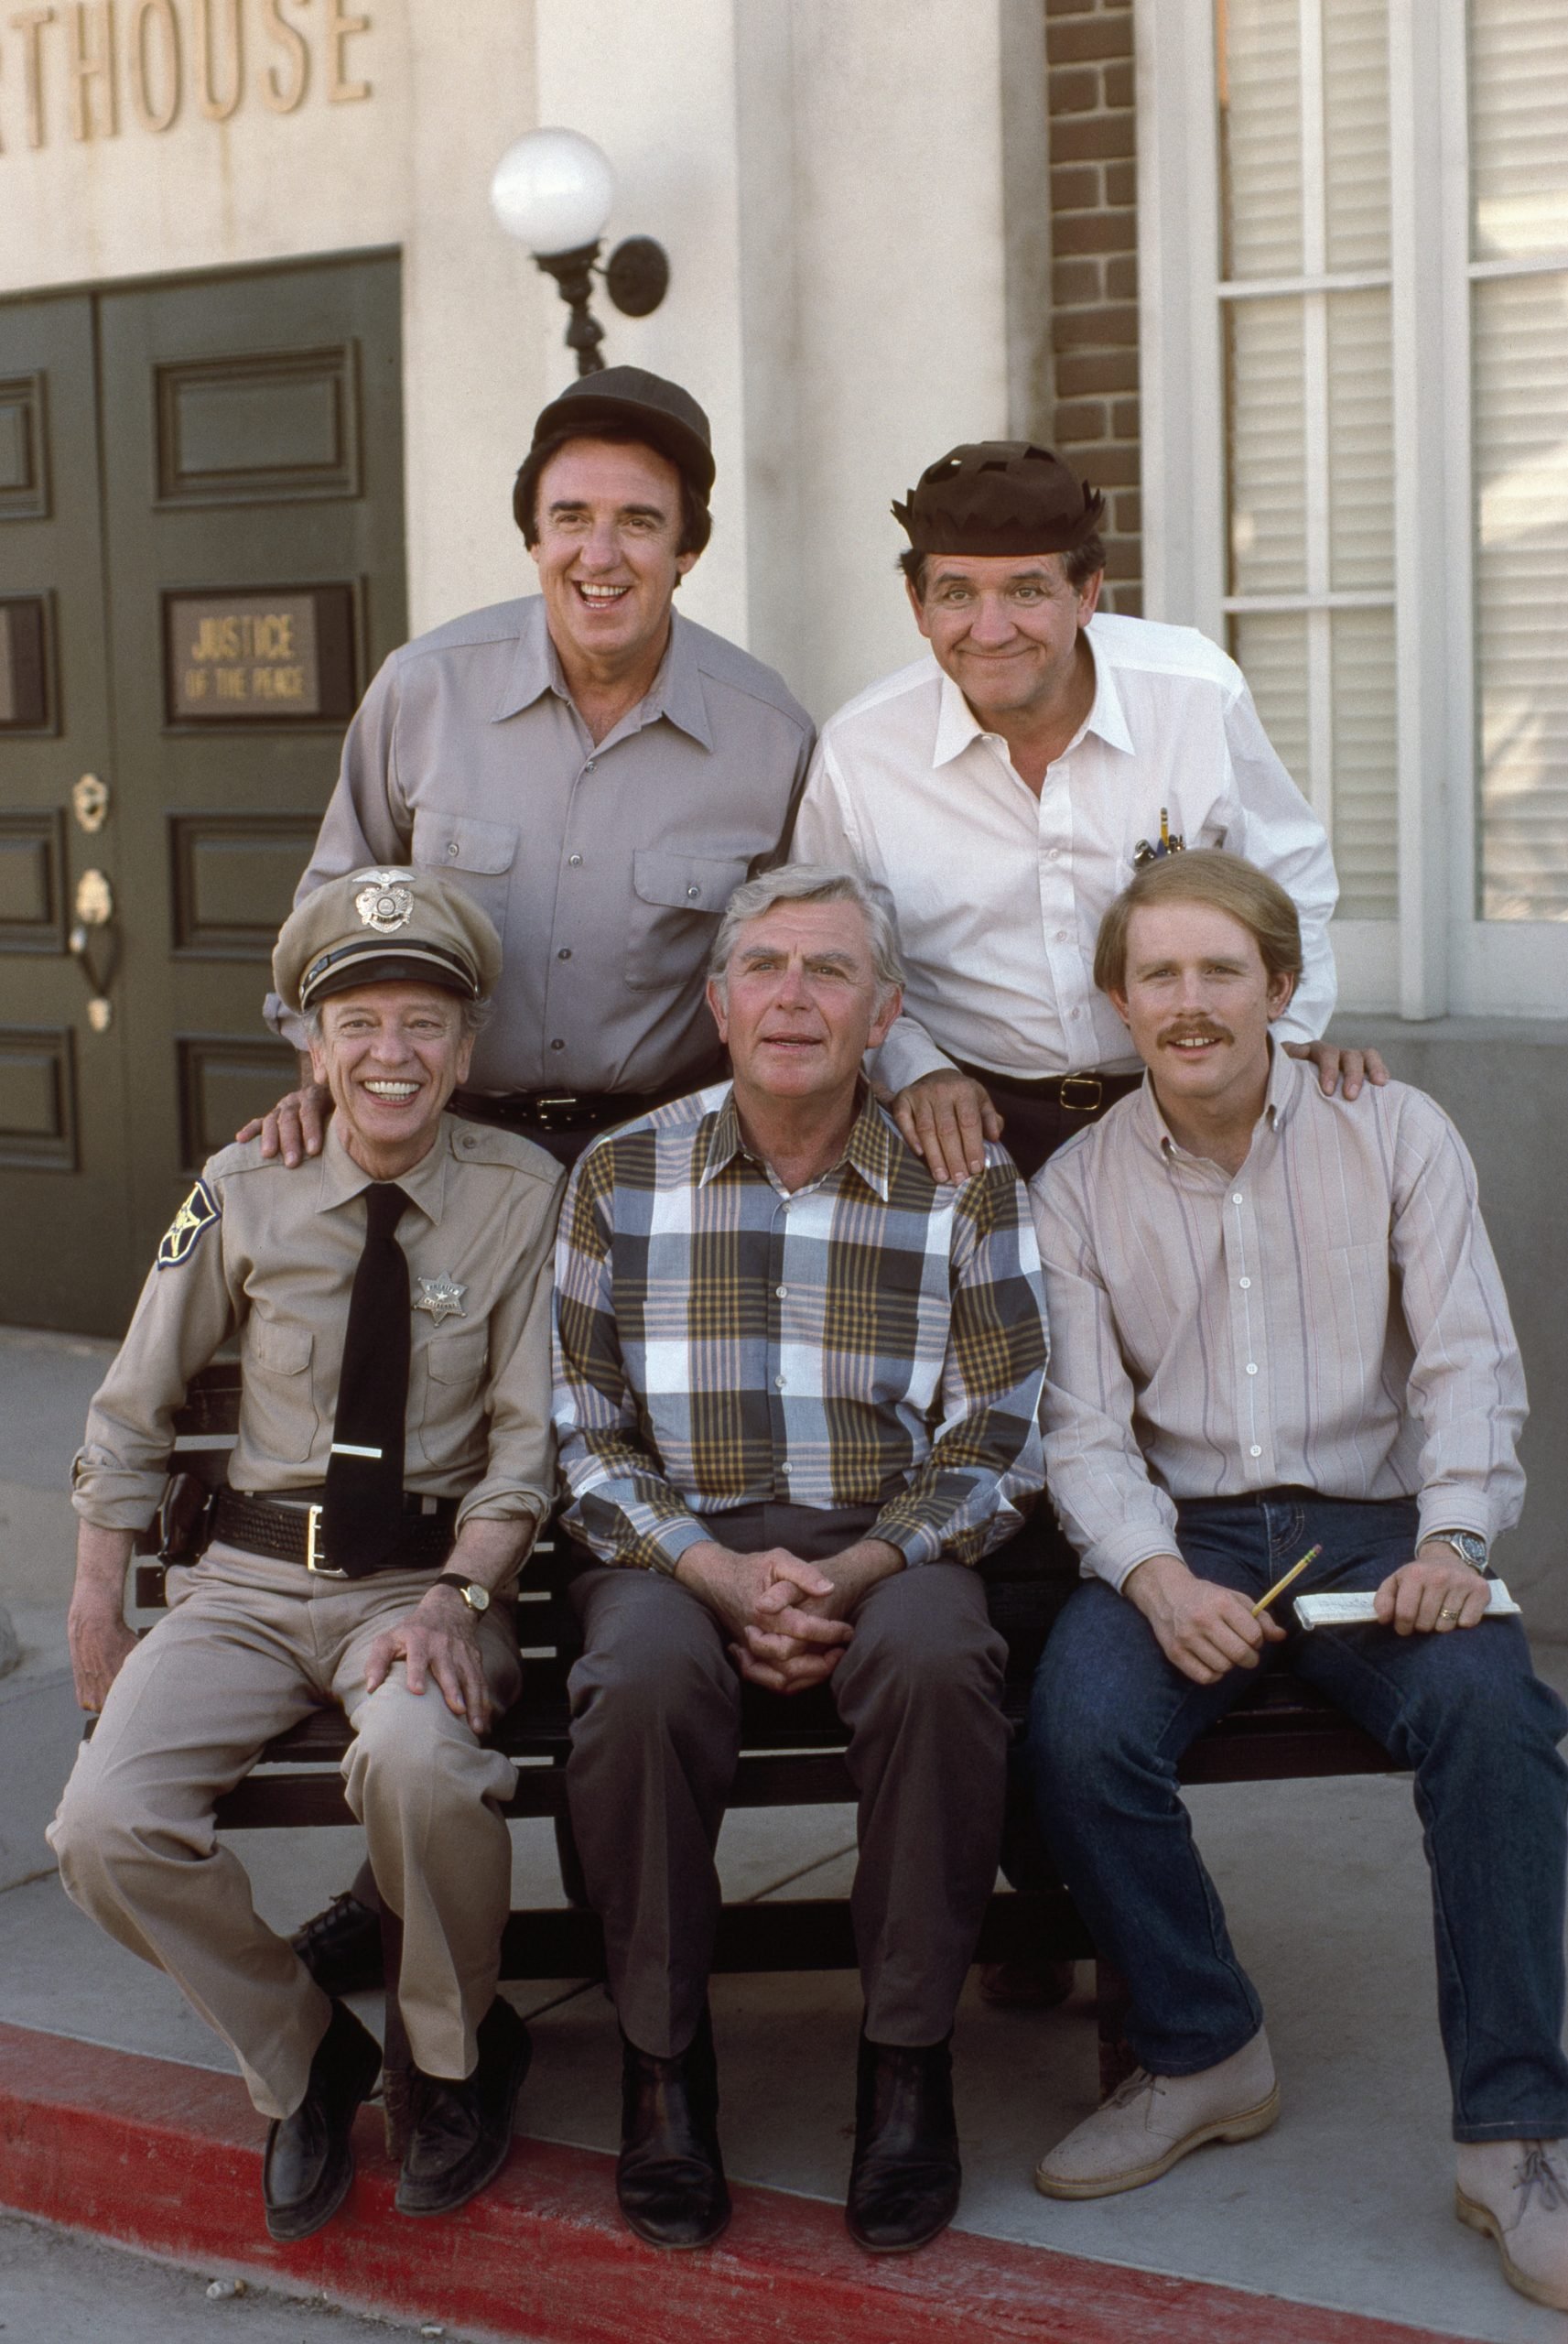 Some of the cast of 1986's TV movie 'Return to Mayberry': (back row l-r) Jim Nabors as Gomer Pyle, George Lindsey as Goober Pyle (front row l-r) Don Knotts as Barney Fife, Andy Griffith as Andy Taylor, and Ron Howard as Opie Taylor